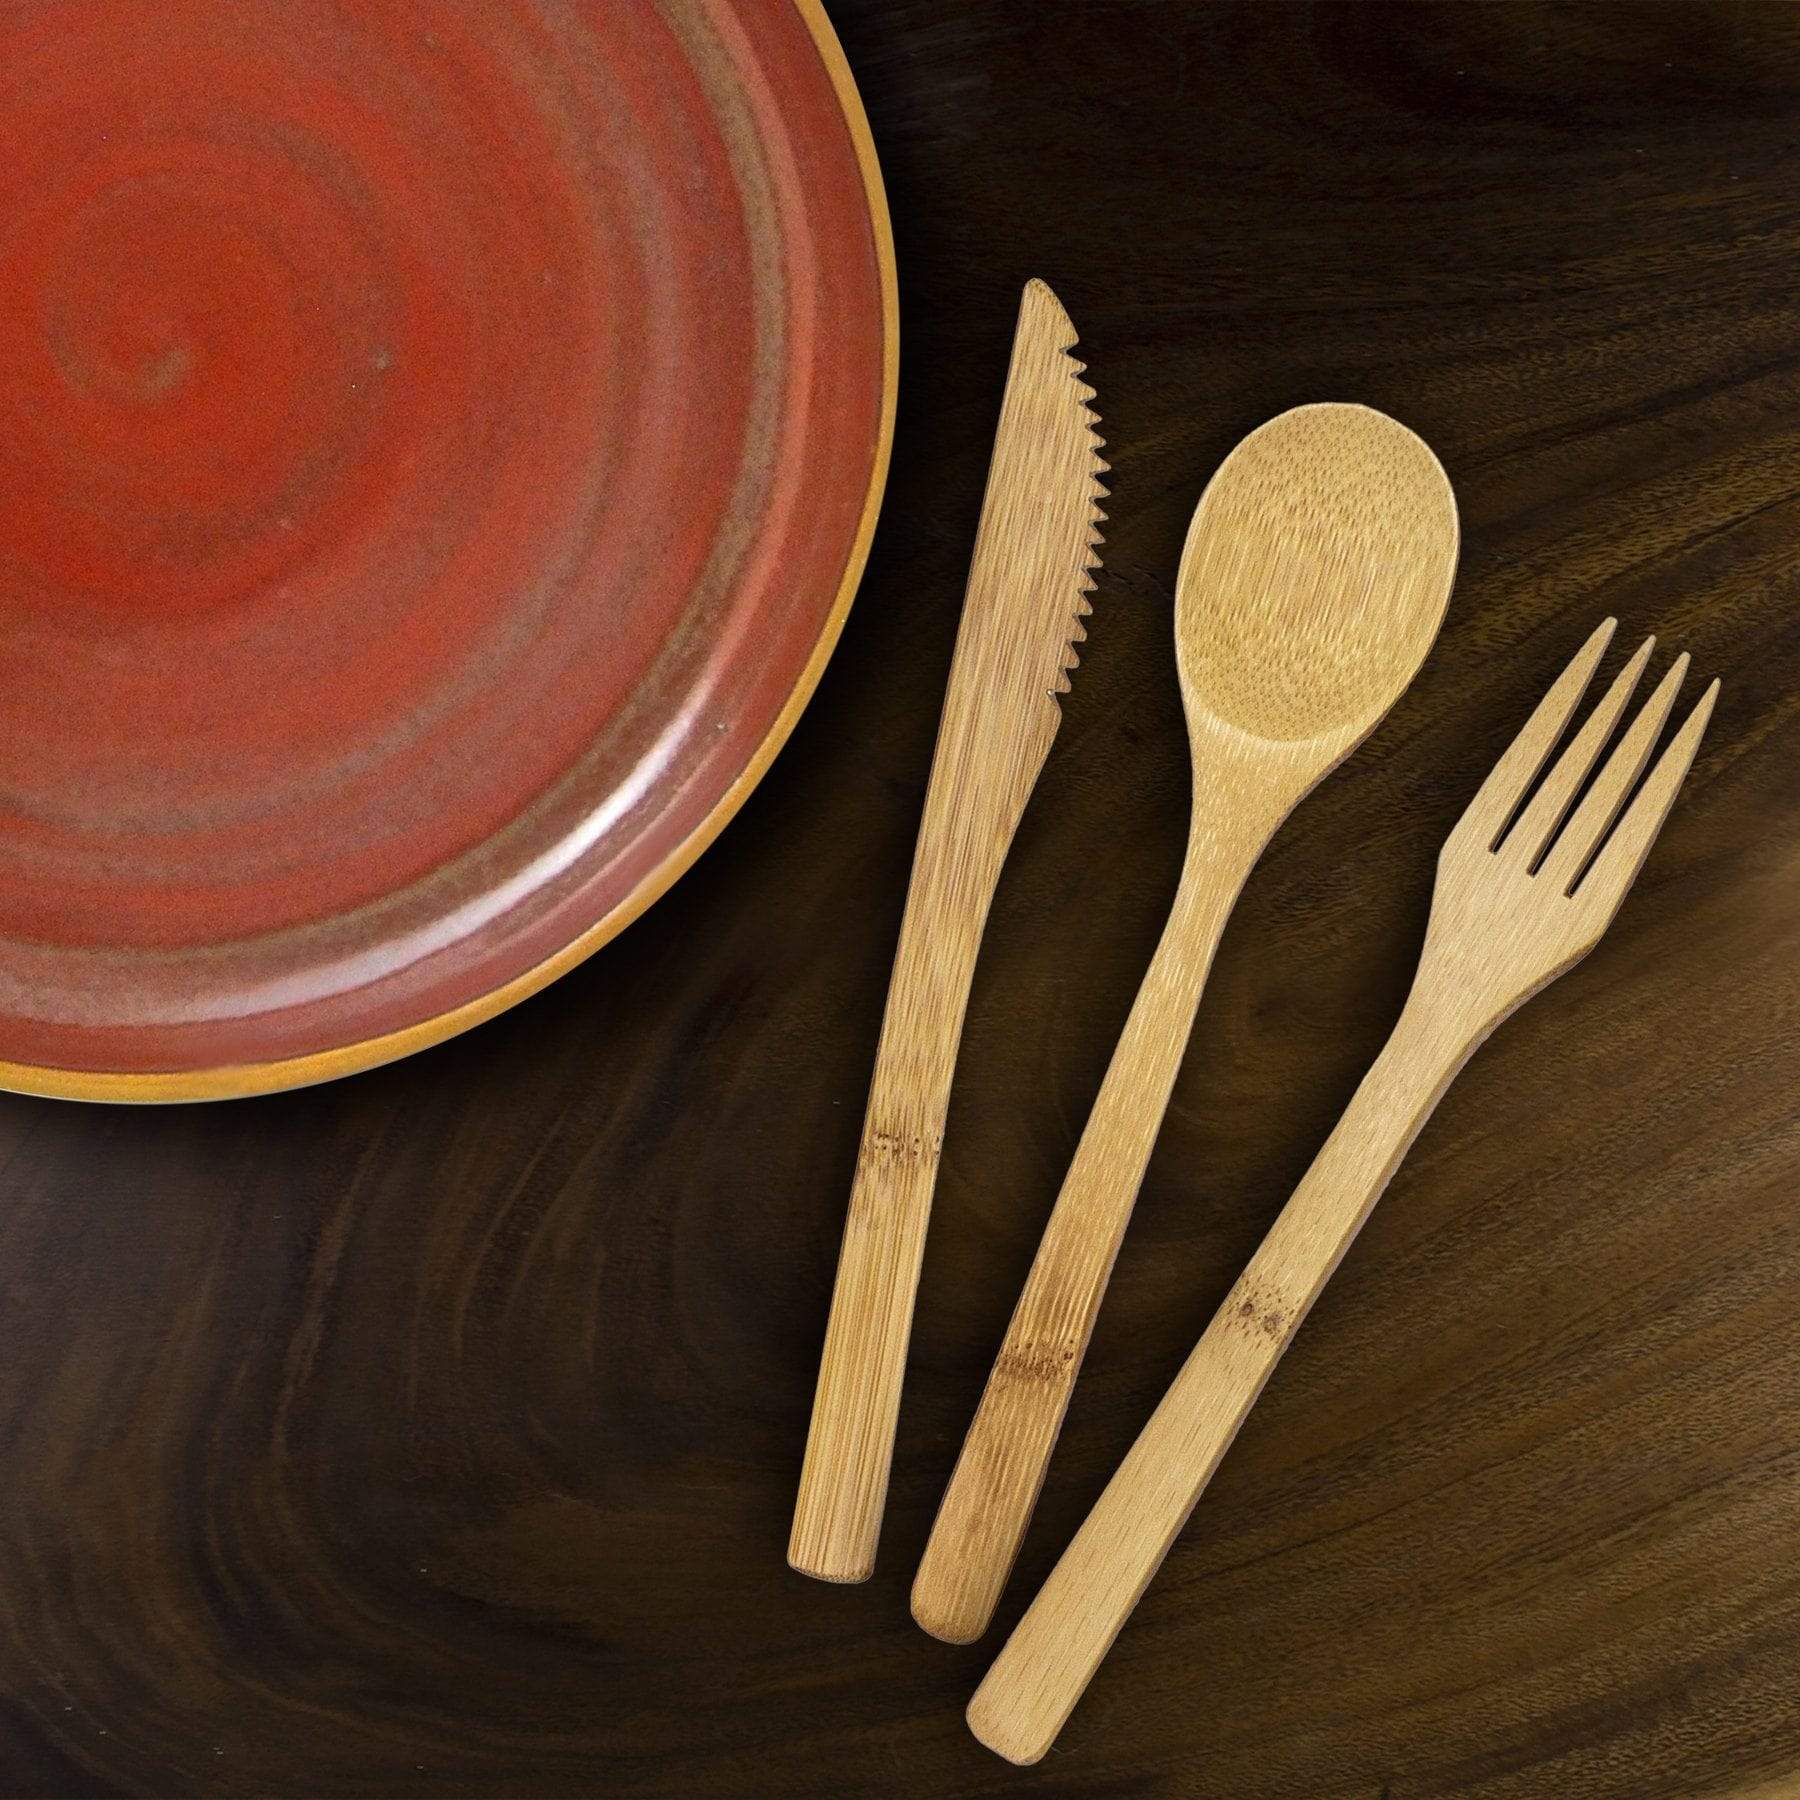 https://totallybamboo.com/cdn/shop/products/3-piece-reusable-flatware-set-fork-spoon-and-knife-totally-bamboo-142832.jpg?v=1628107261